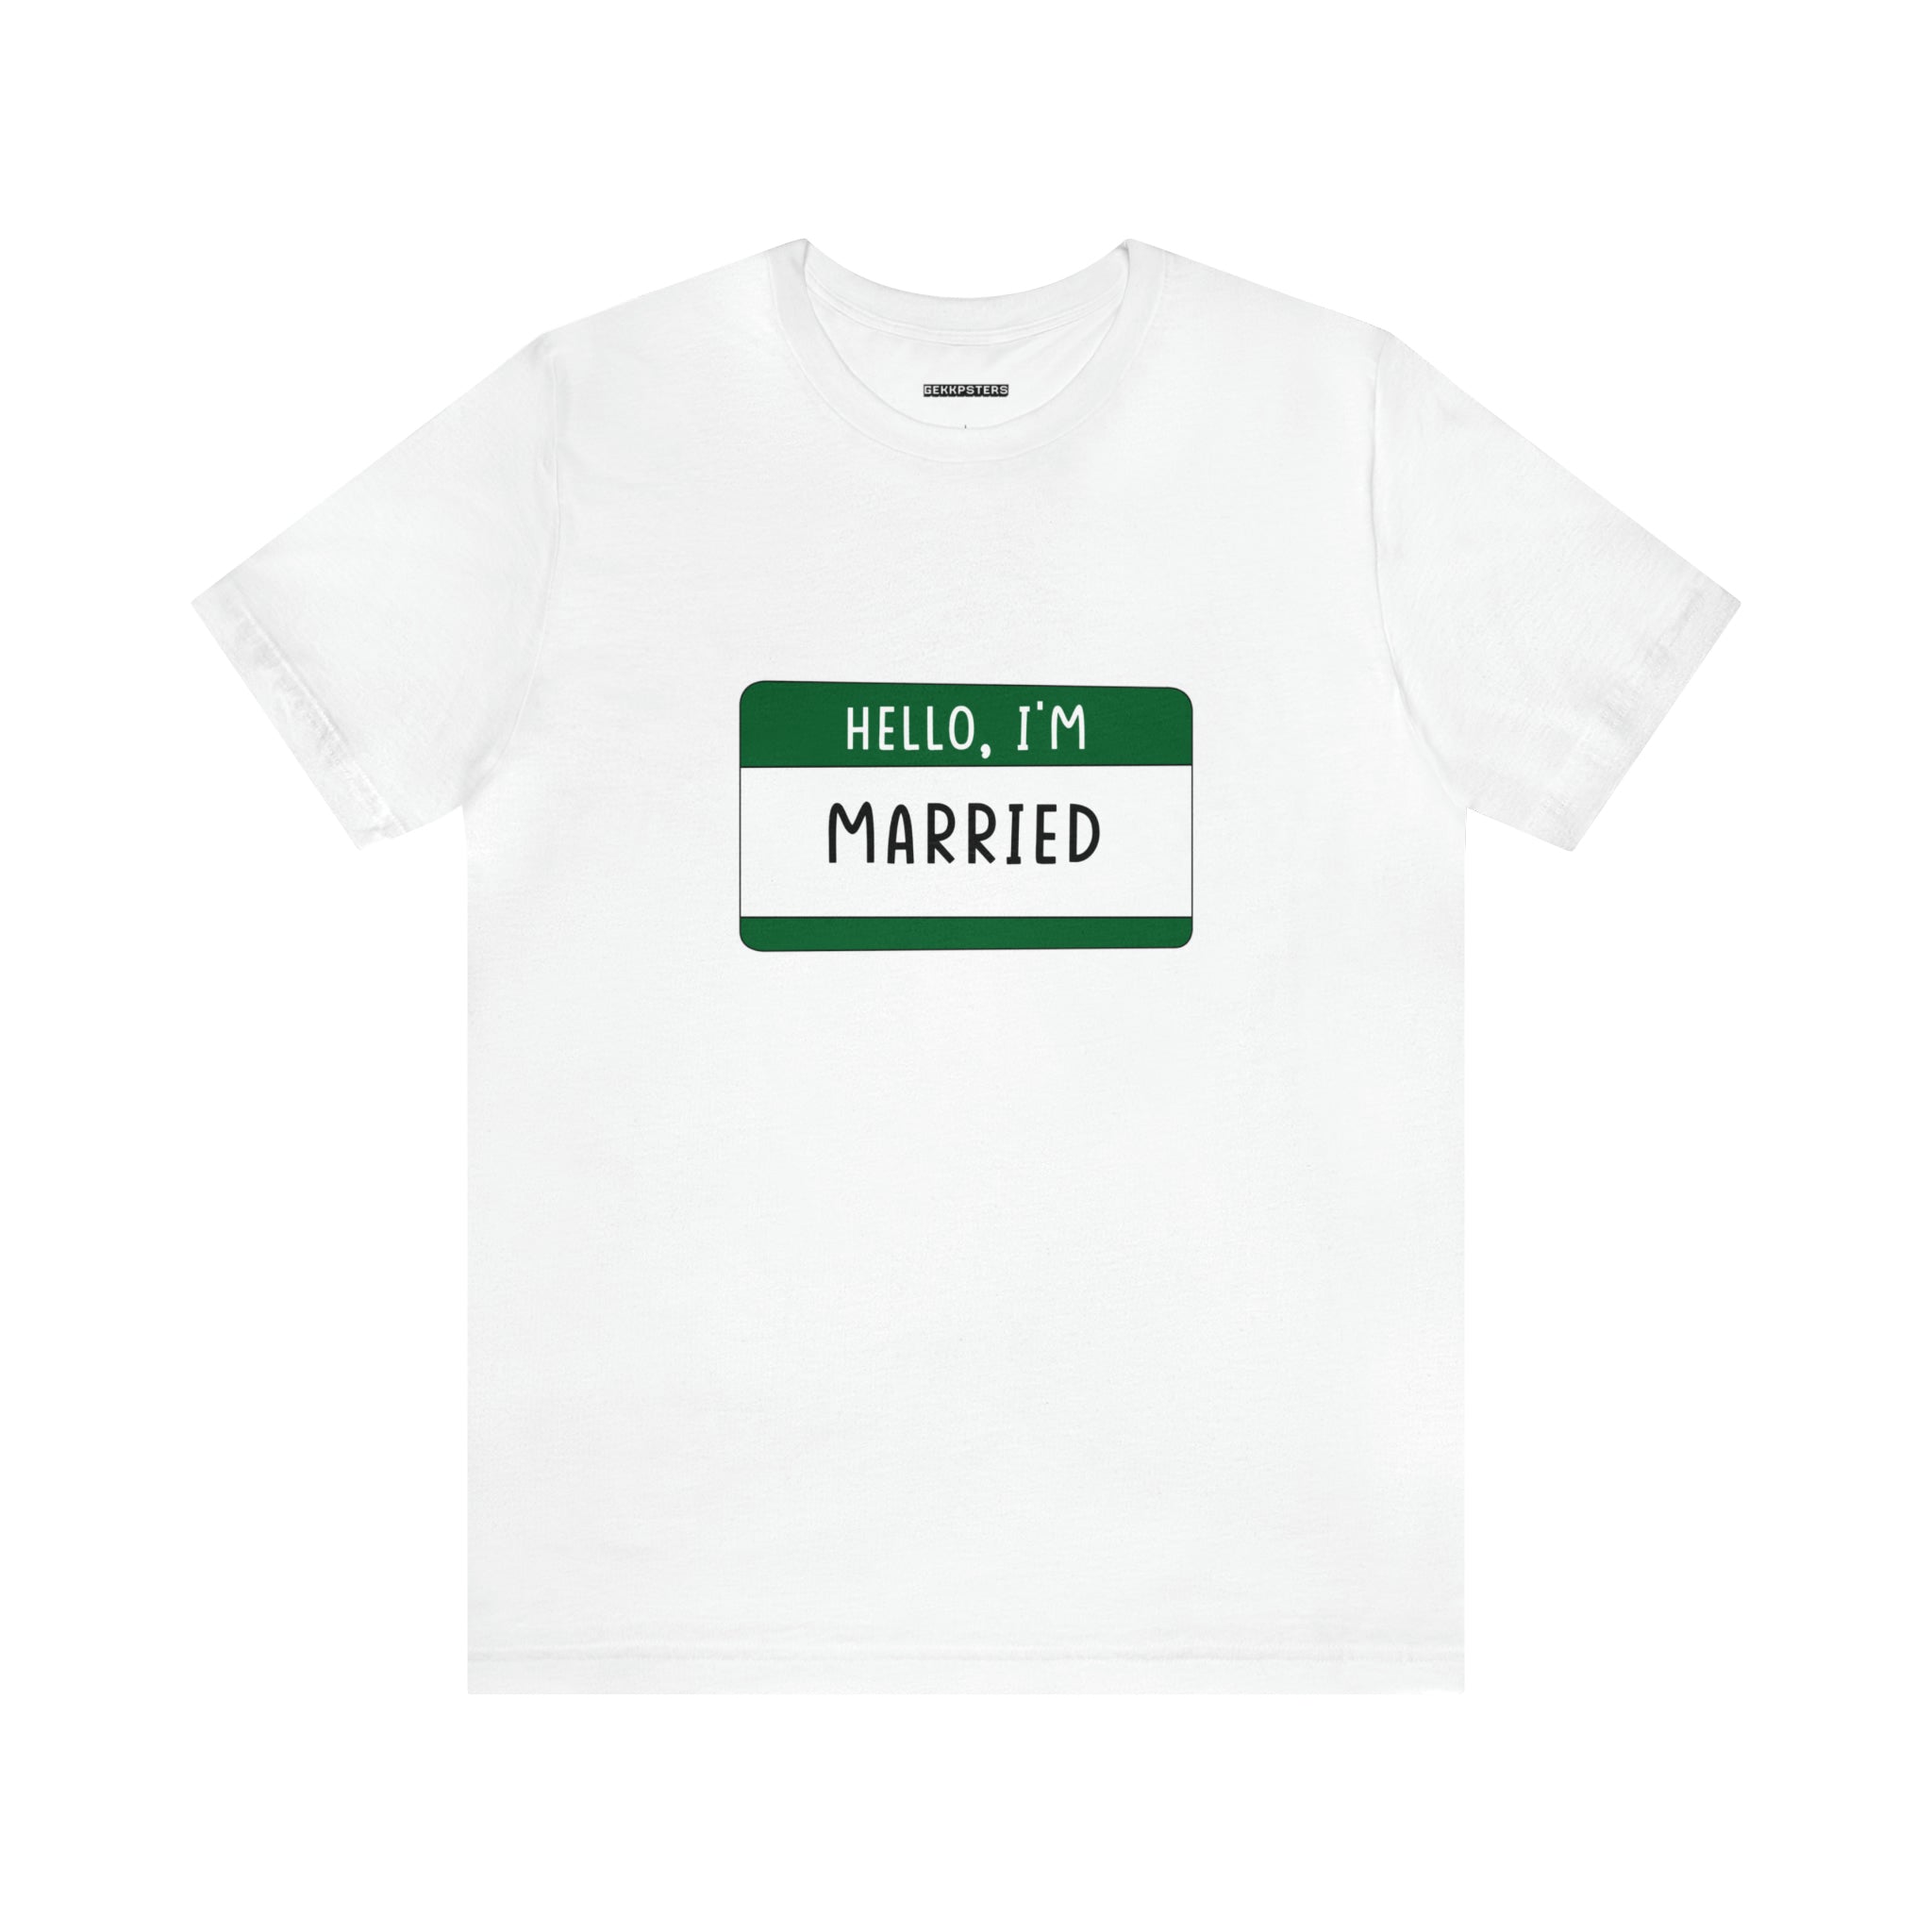 White Hello, I'm Married T-Shirt with a green name tag design printed on the chest. Ideal for geeks and gamers looking to add a fun twist to their wardrobe.